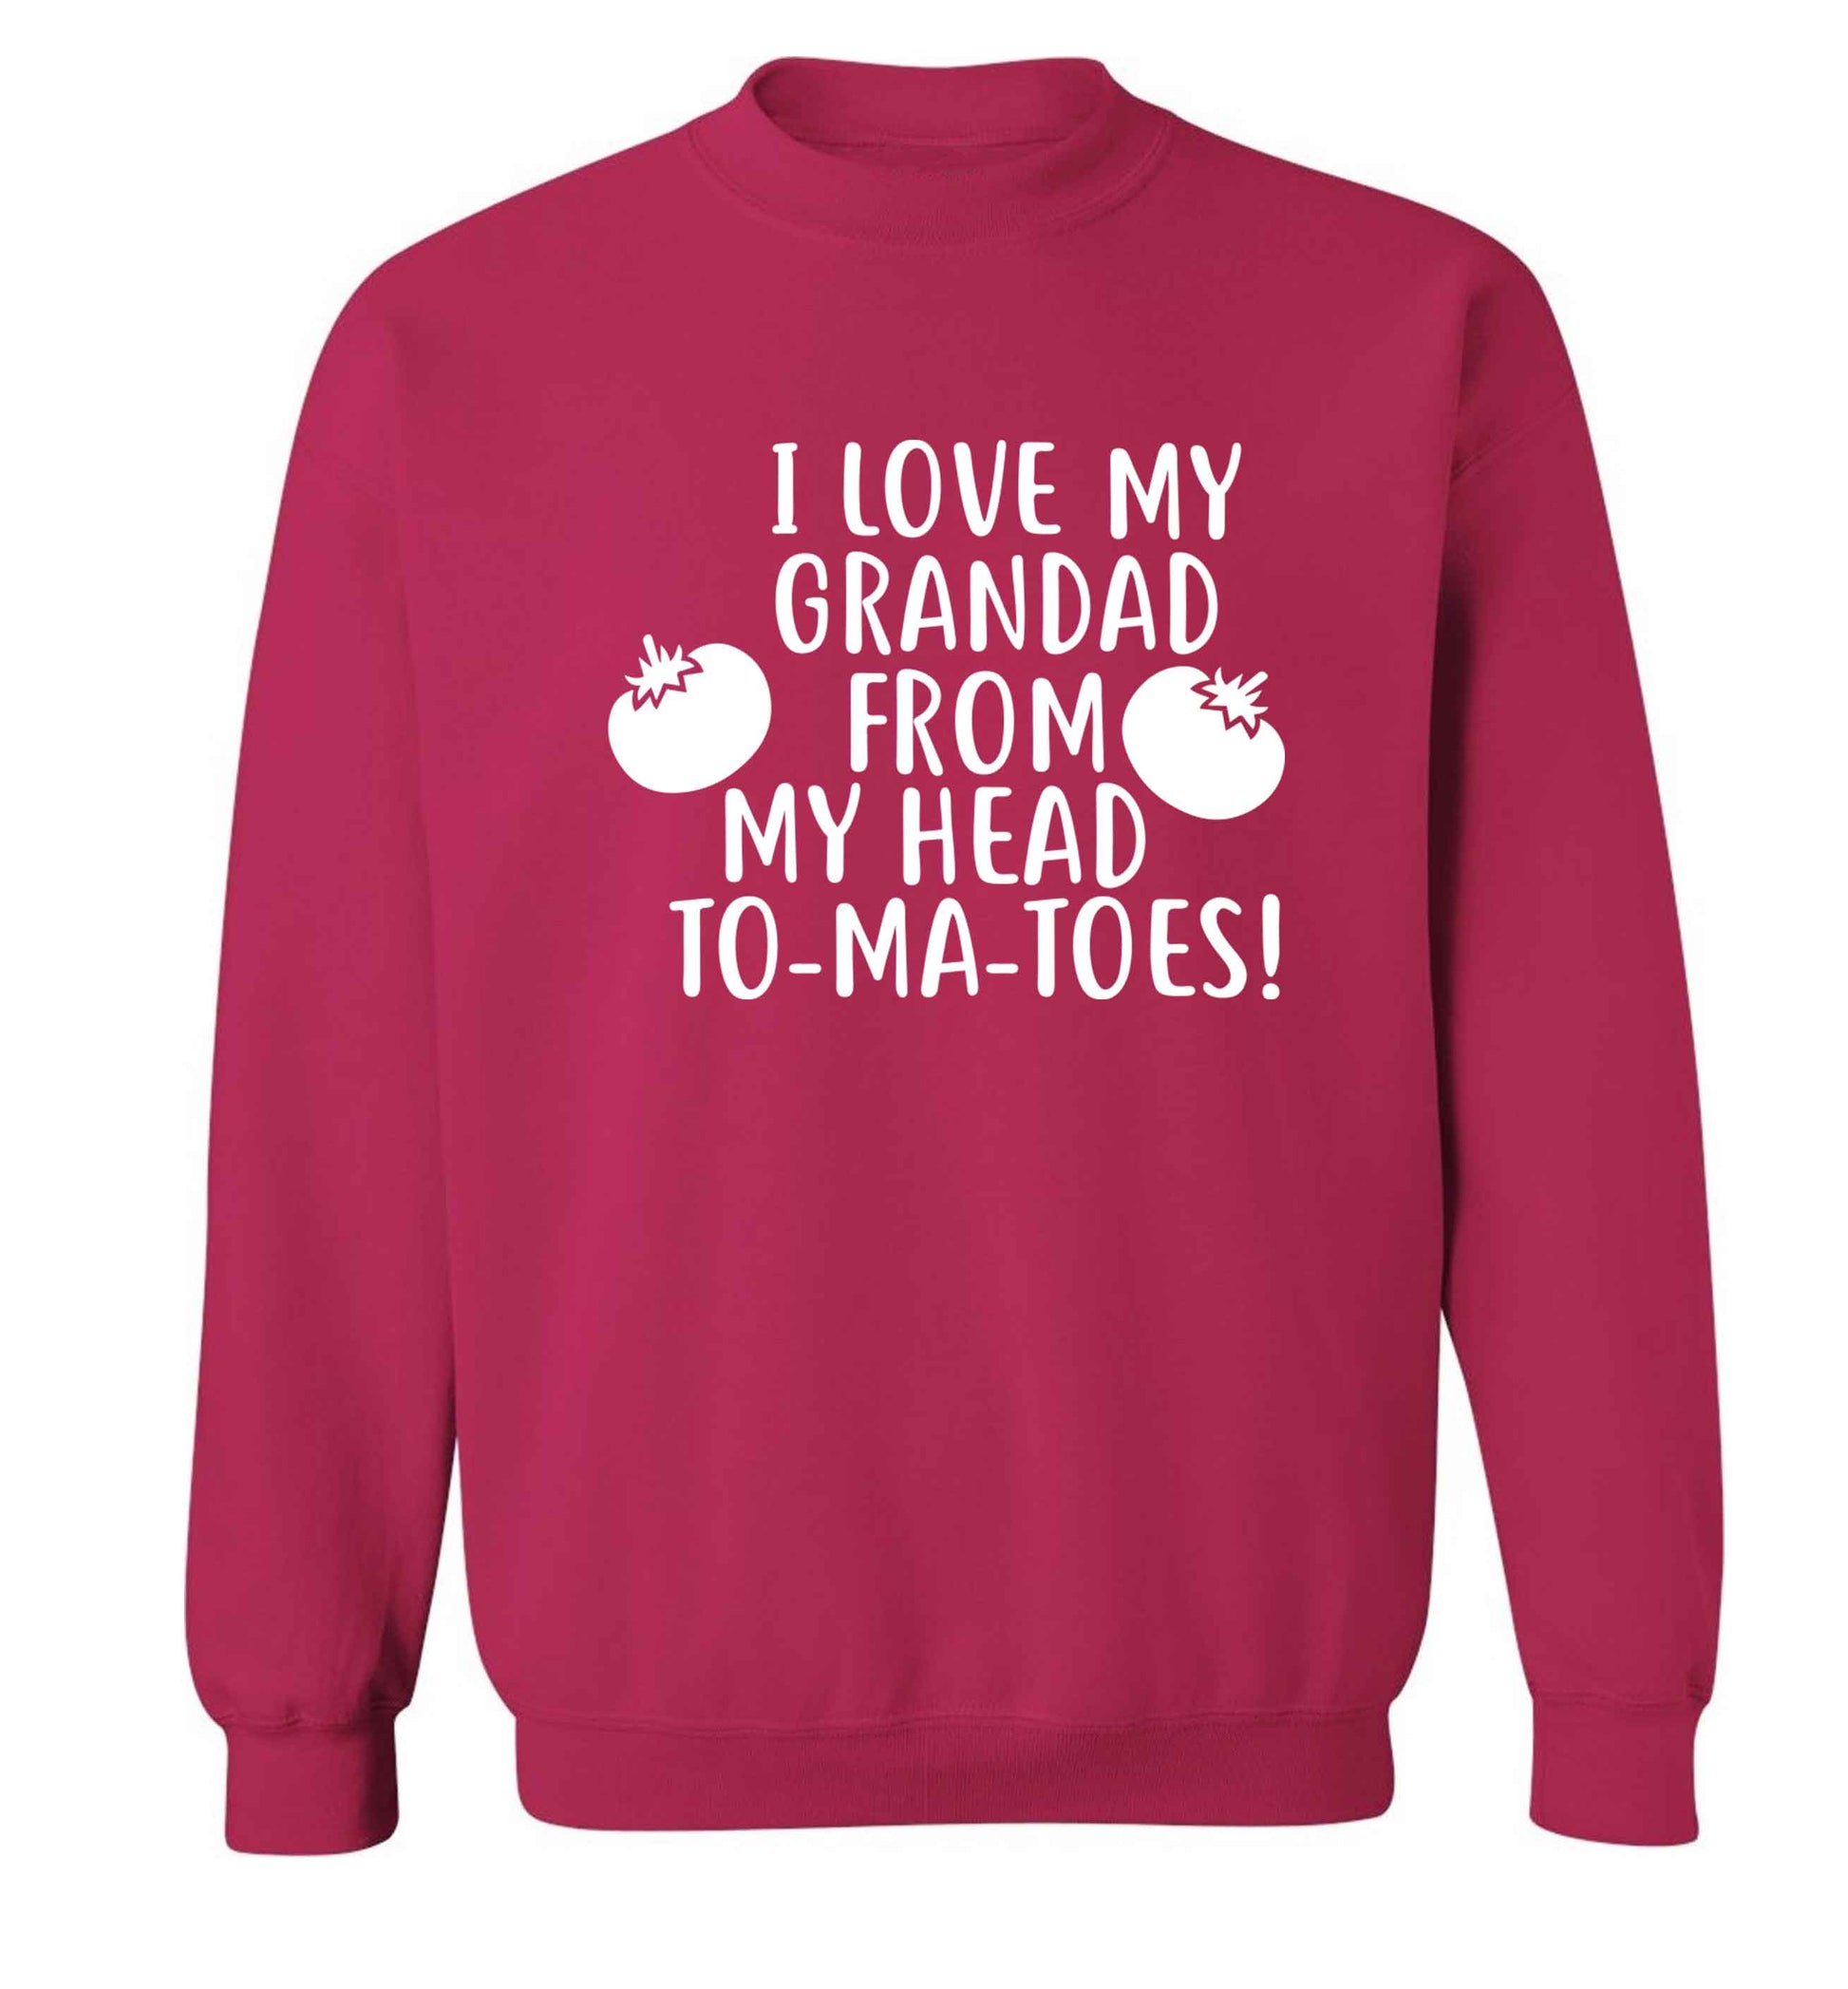 I love my grandad from my head To-Ma-Toes Adult's unisex pink Sweater 2XL